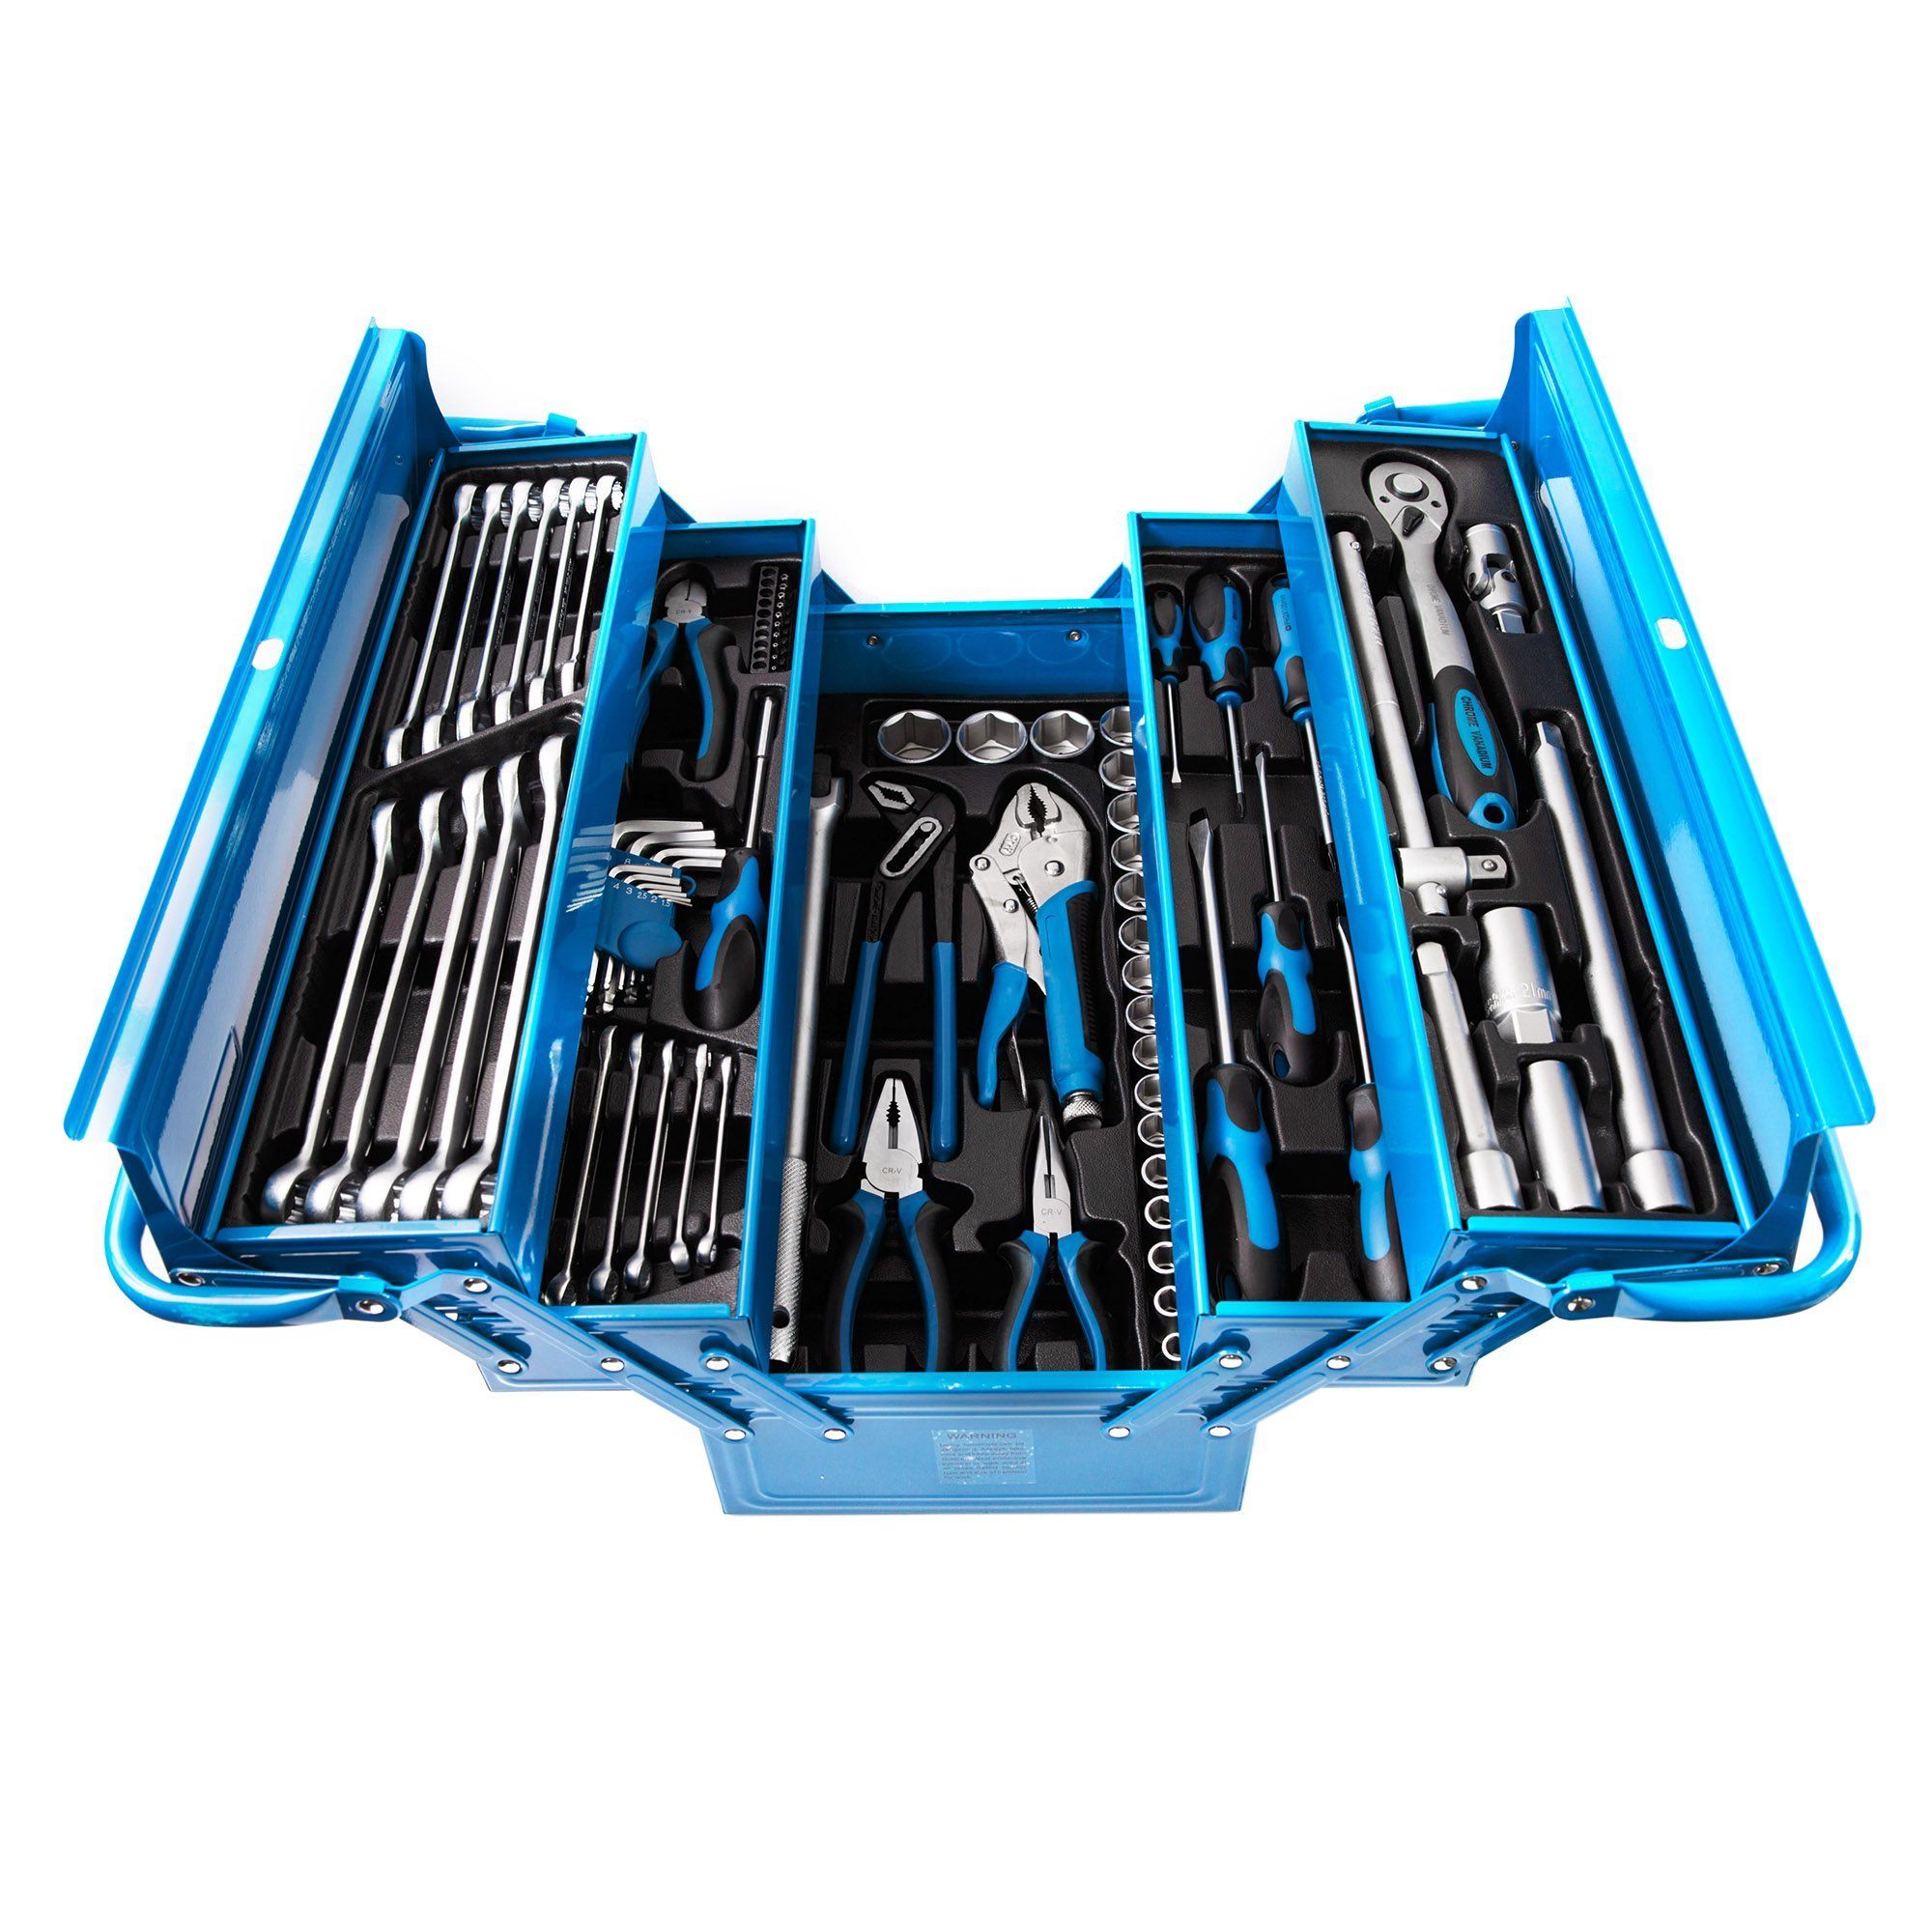 China New Product Toy Tool Kit - 86PCS Professional Hand Tool Set with Metal Box  – MACHINERY TOOLS